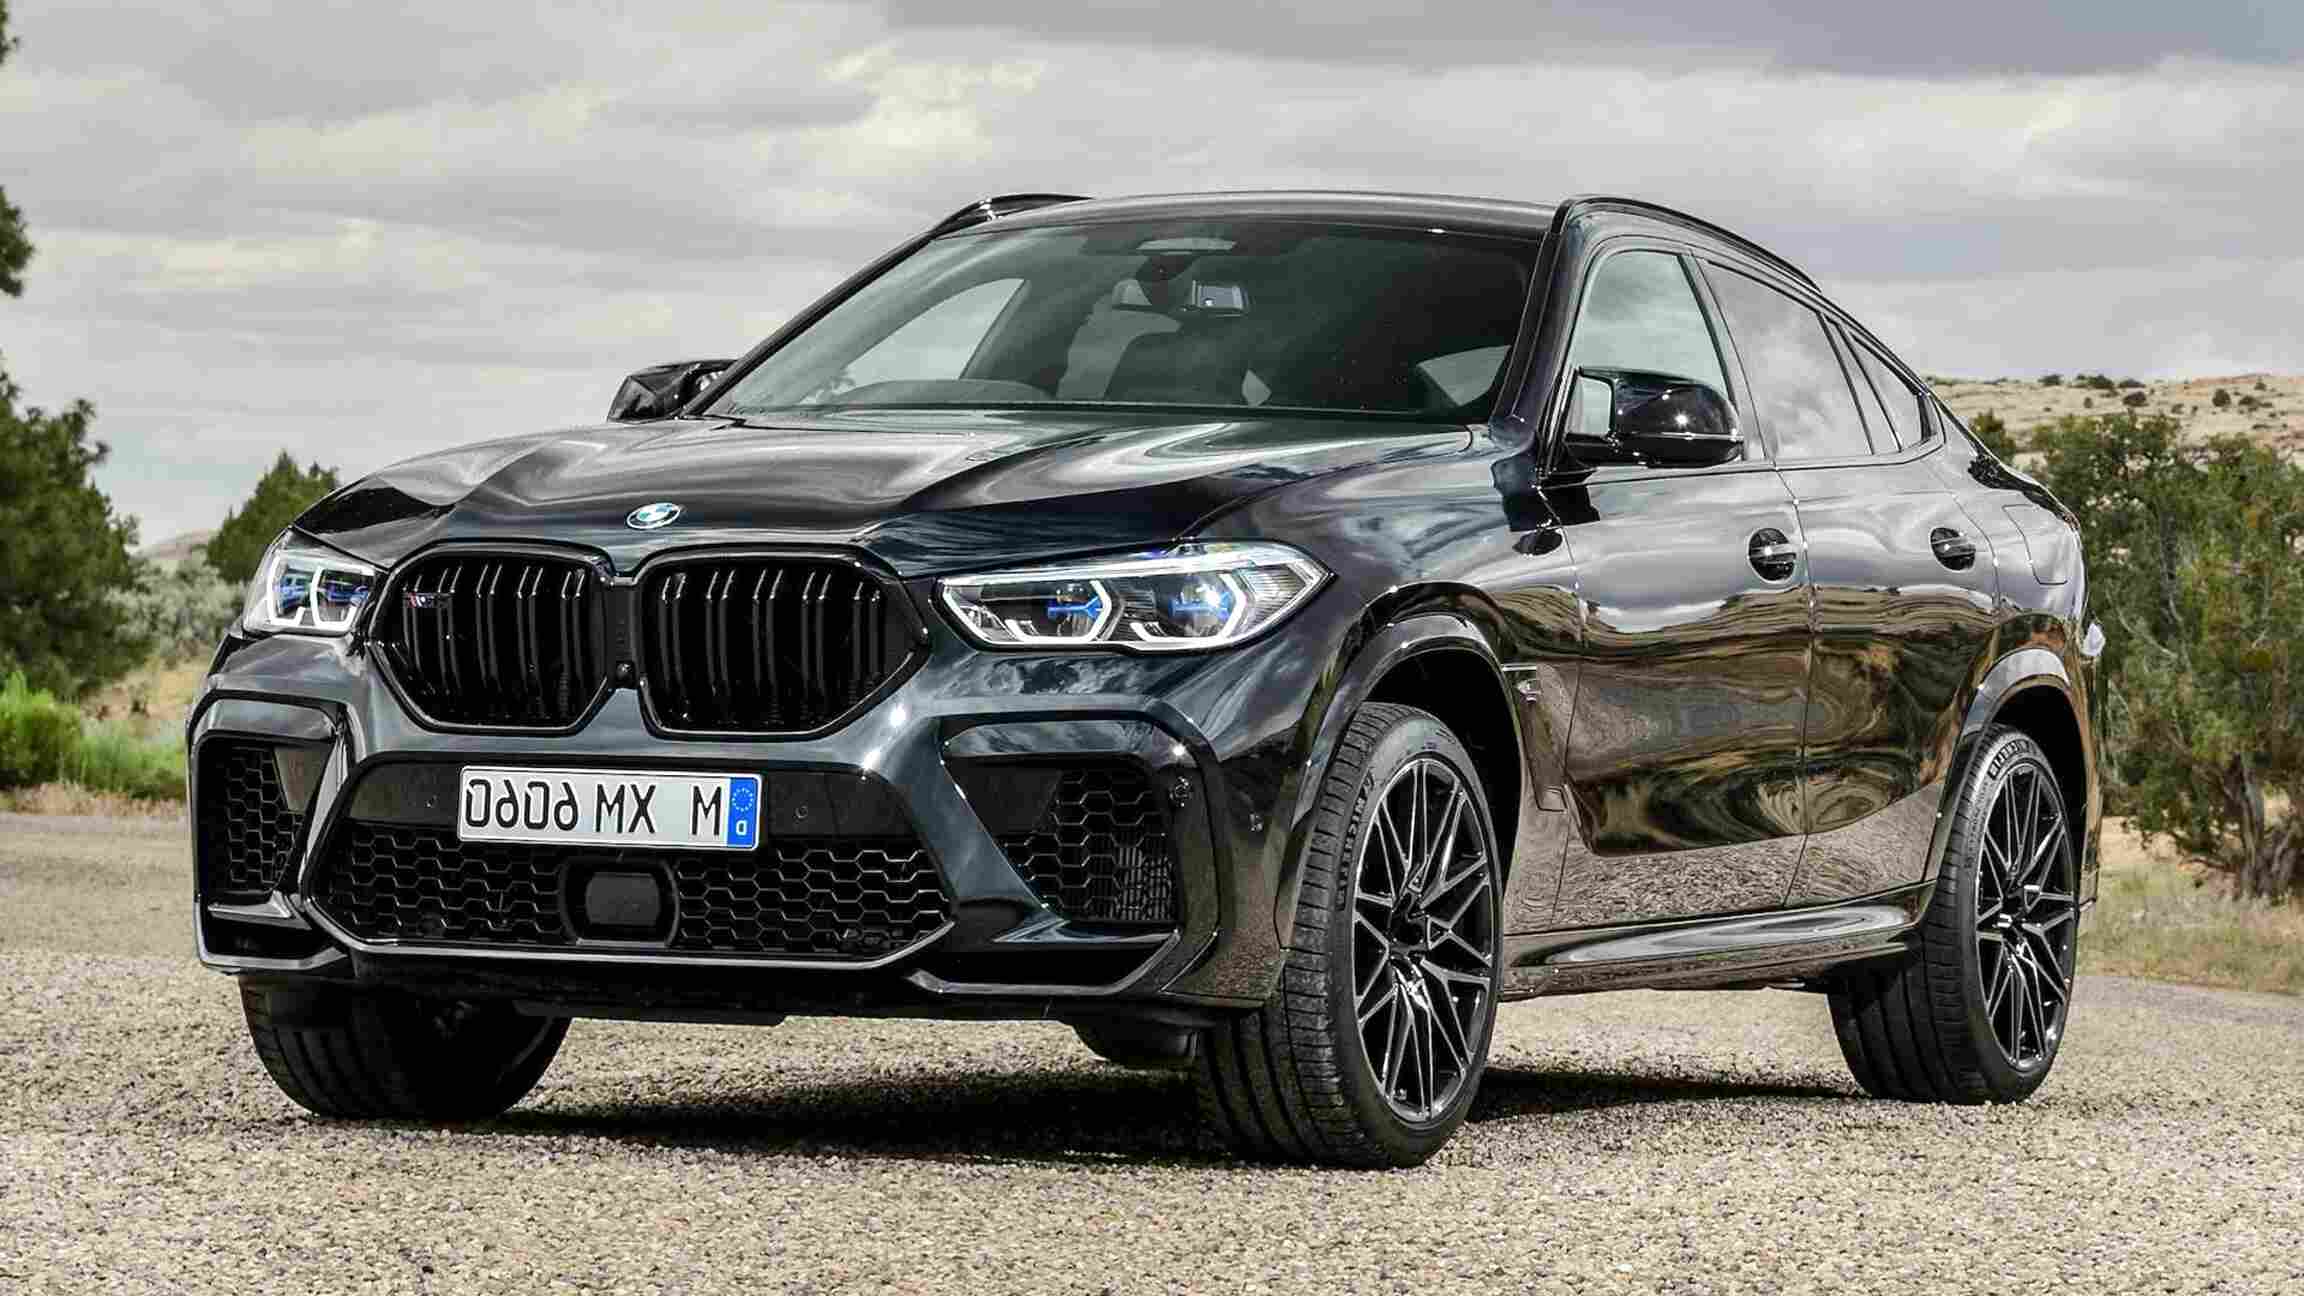 Bmw X6 M for sale in UK | 96 used Bmw X6 Ms